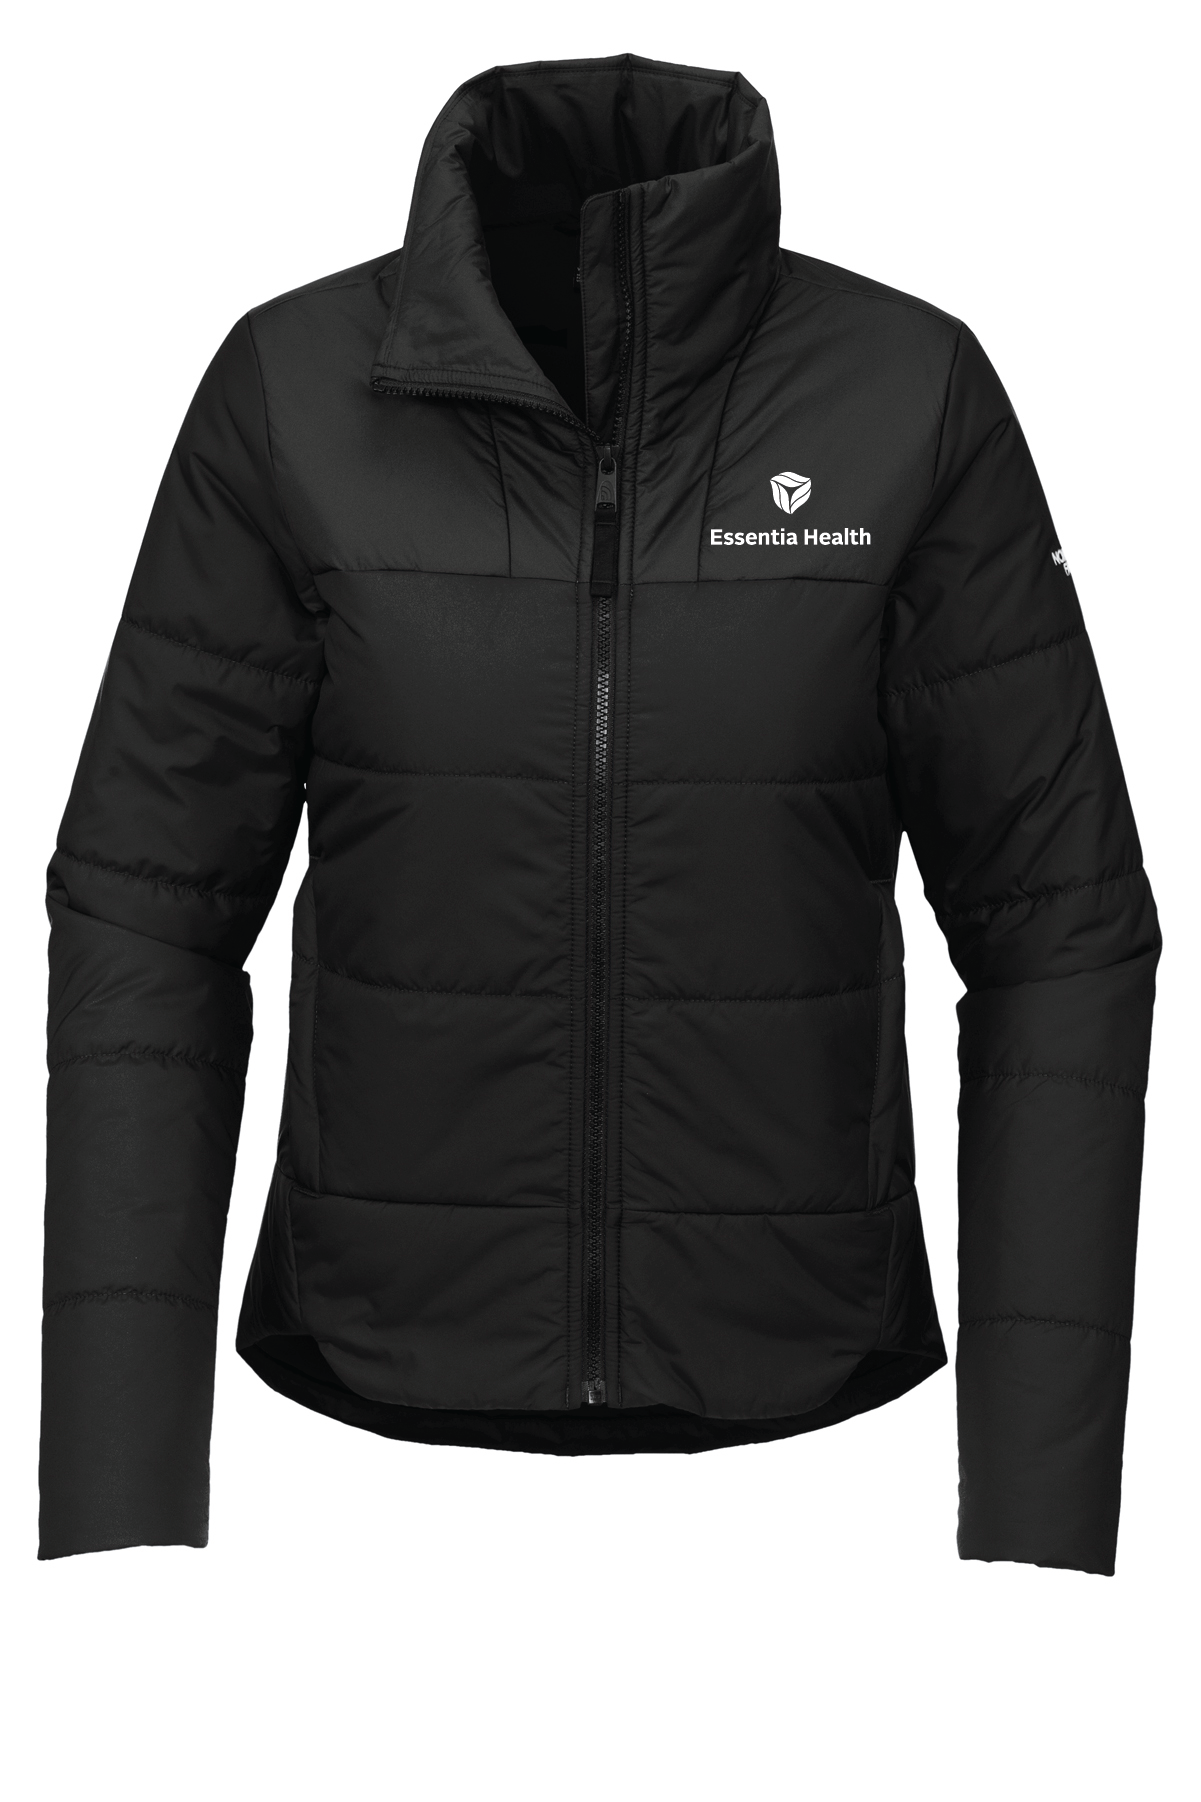 Essentia Health The North Face Ladies Everyday Insulated Jacket - DSP On Demand